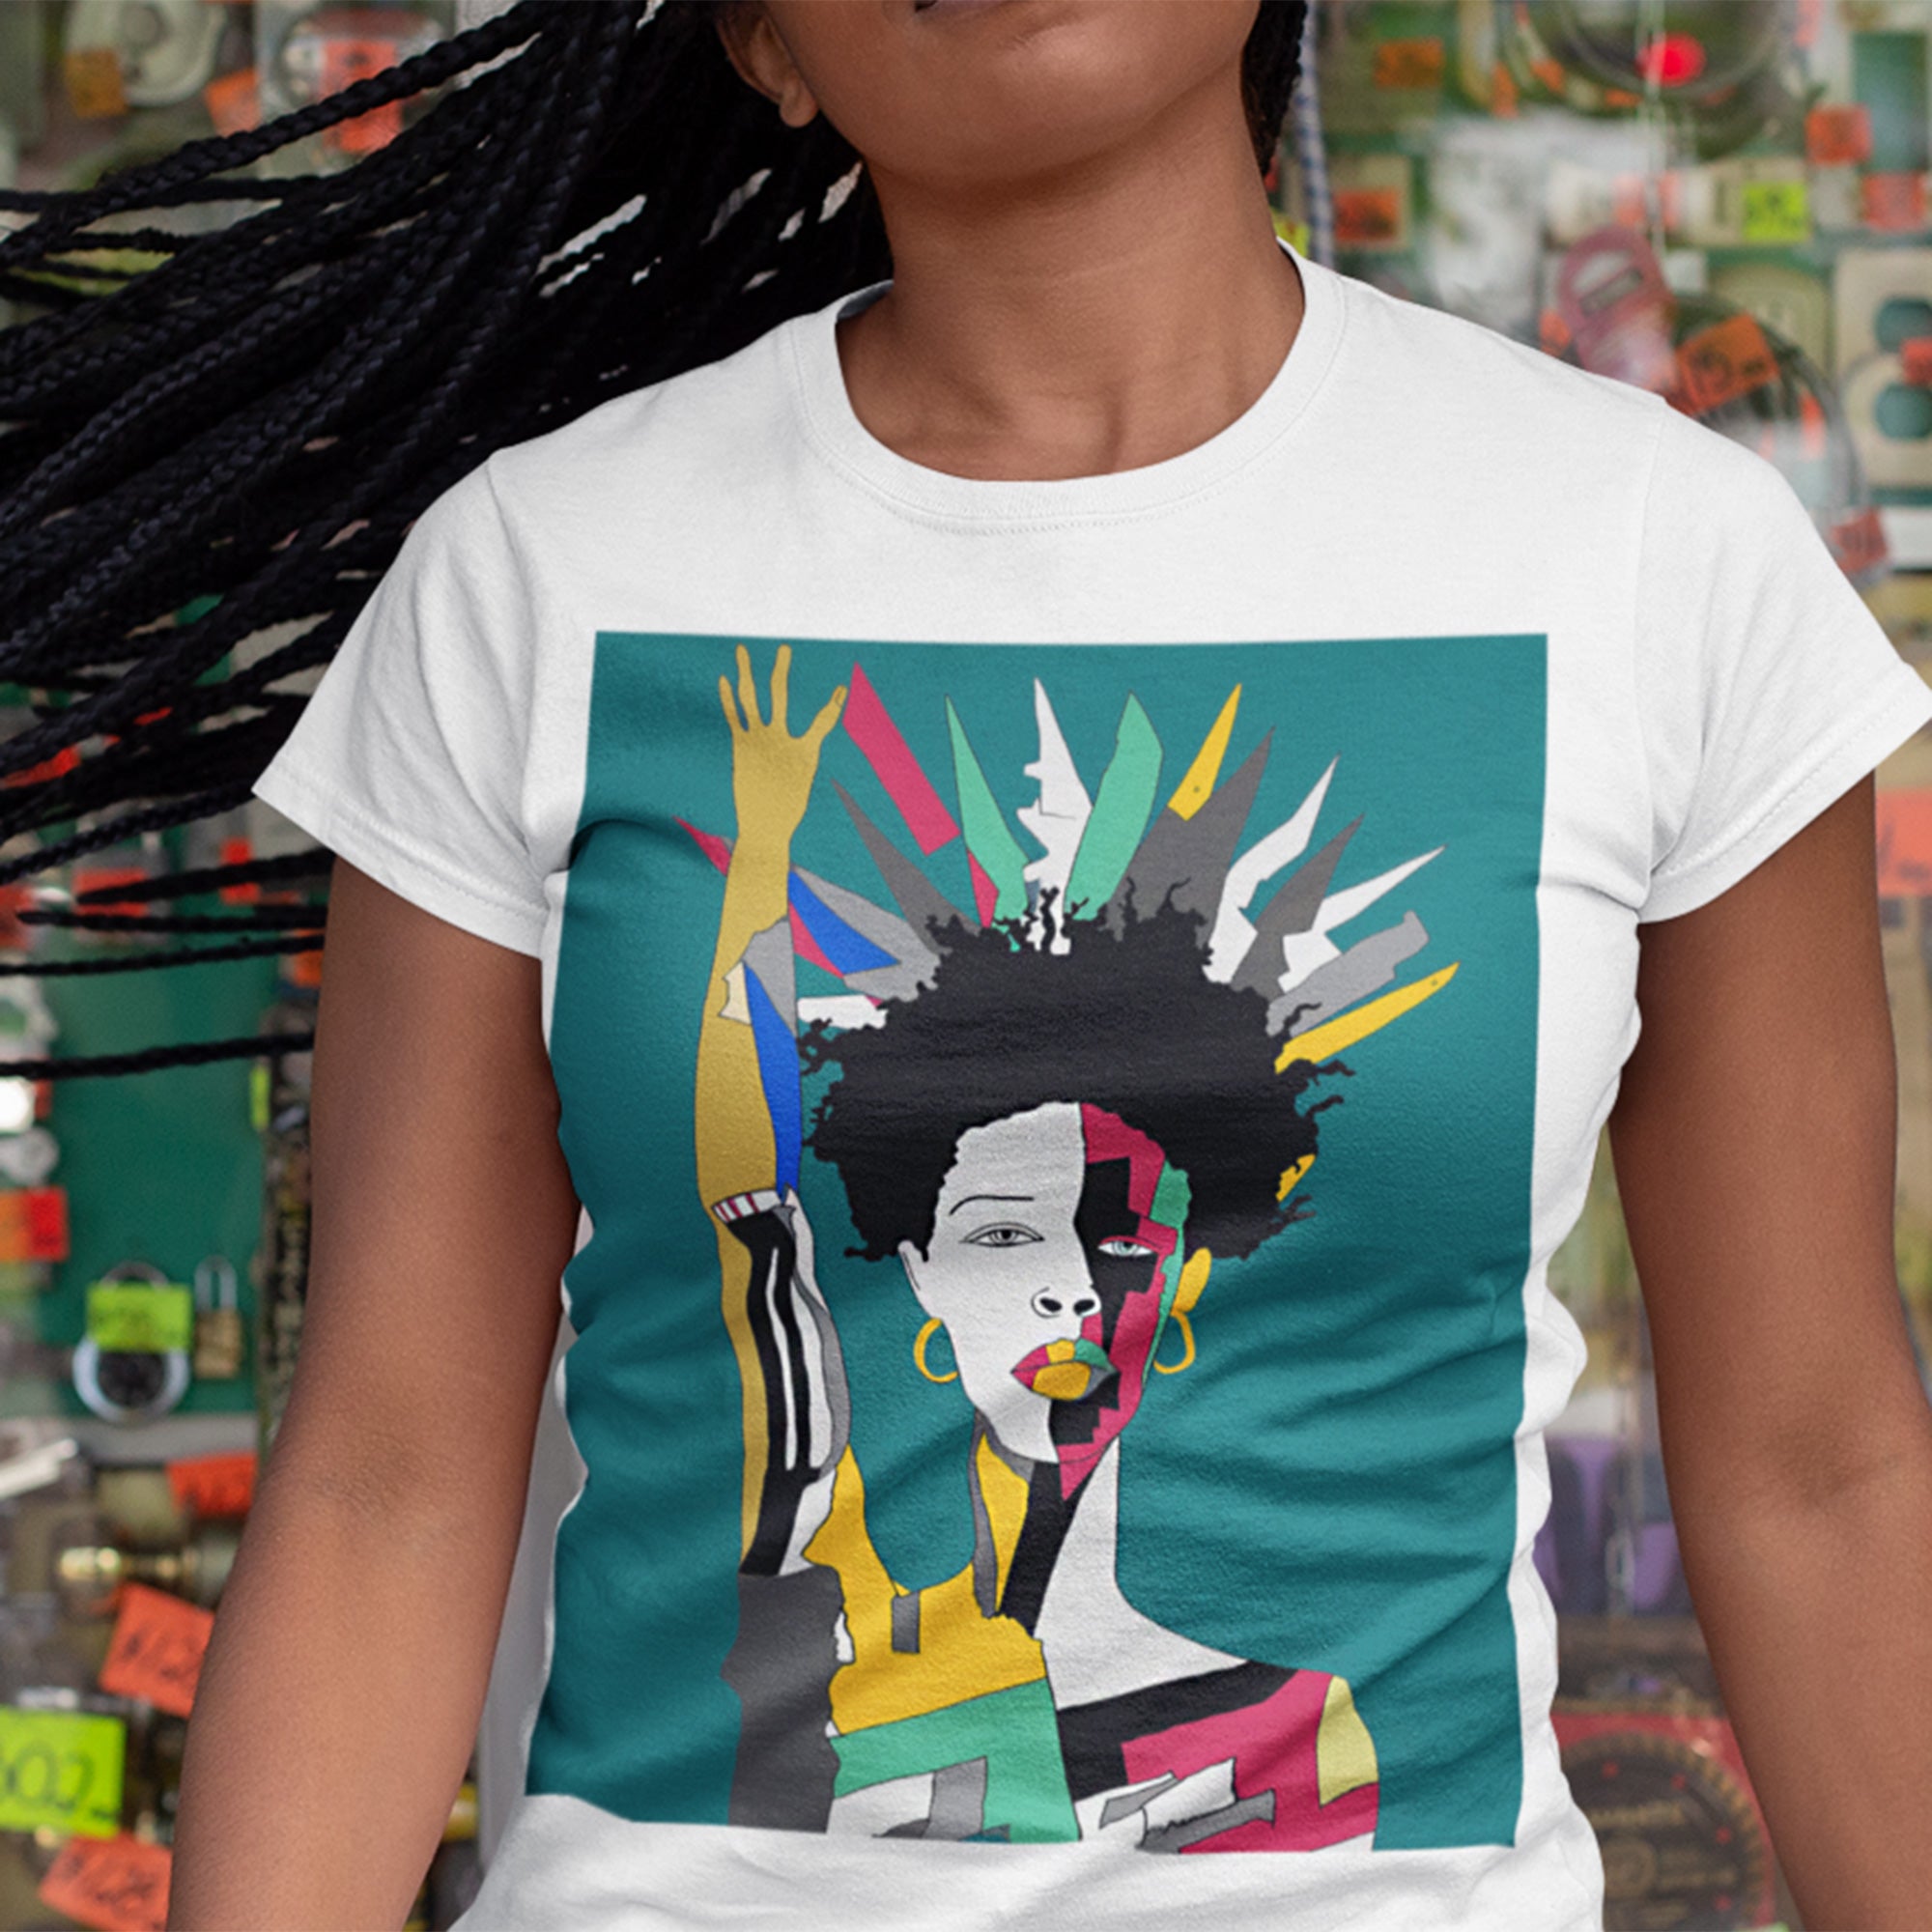 Lady Liberty Art Tee in white - Style 20